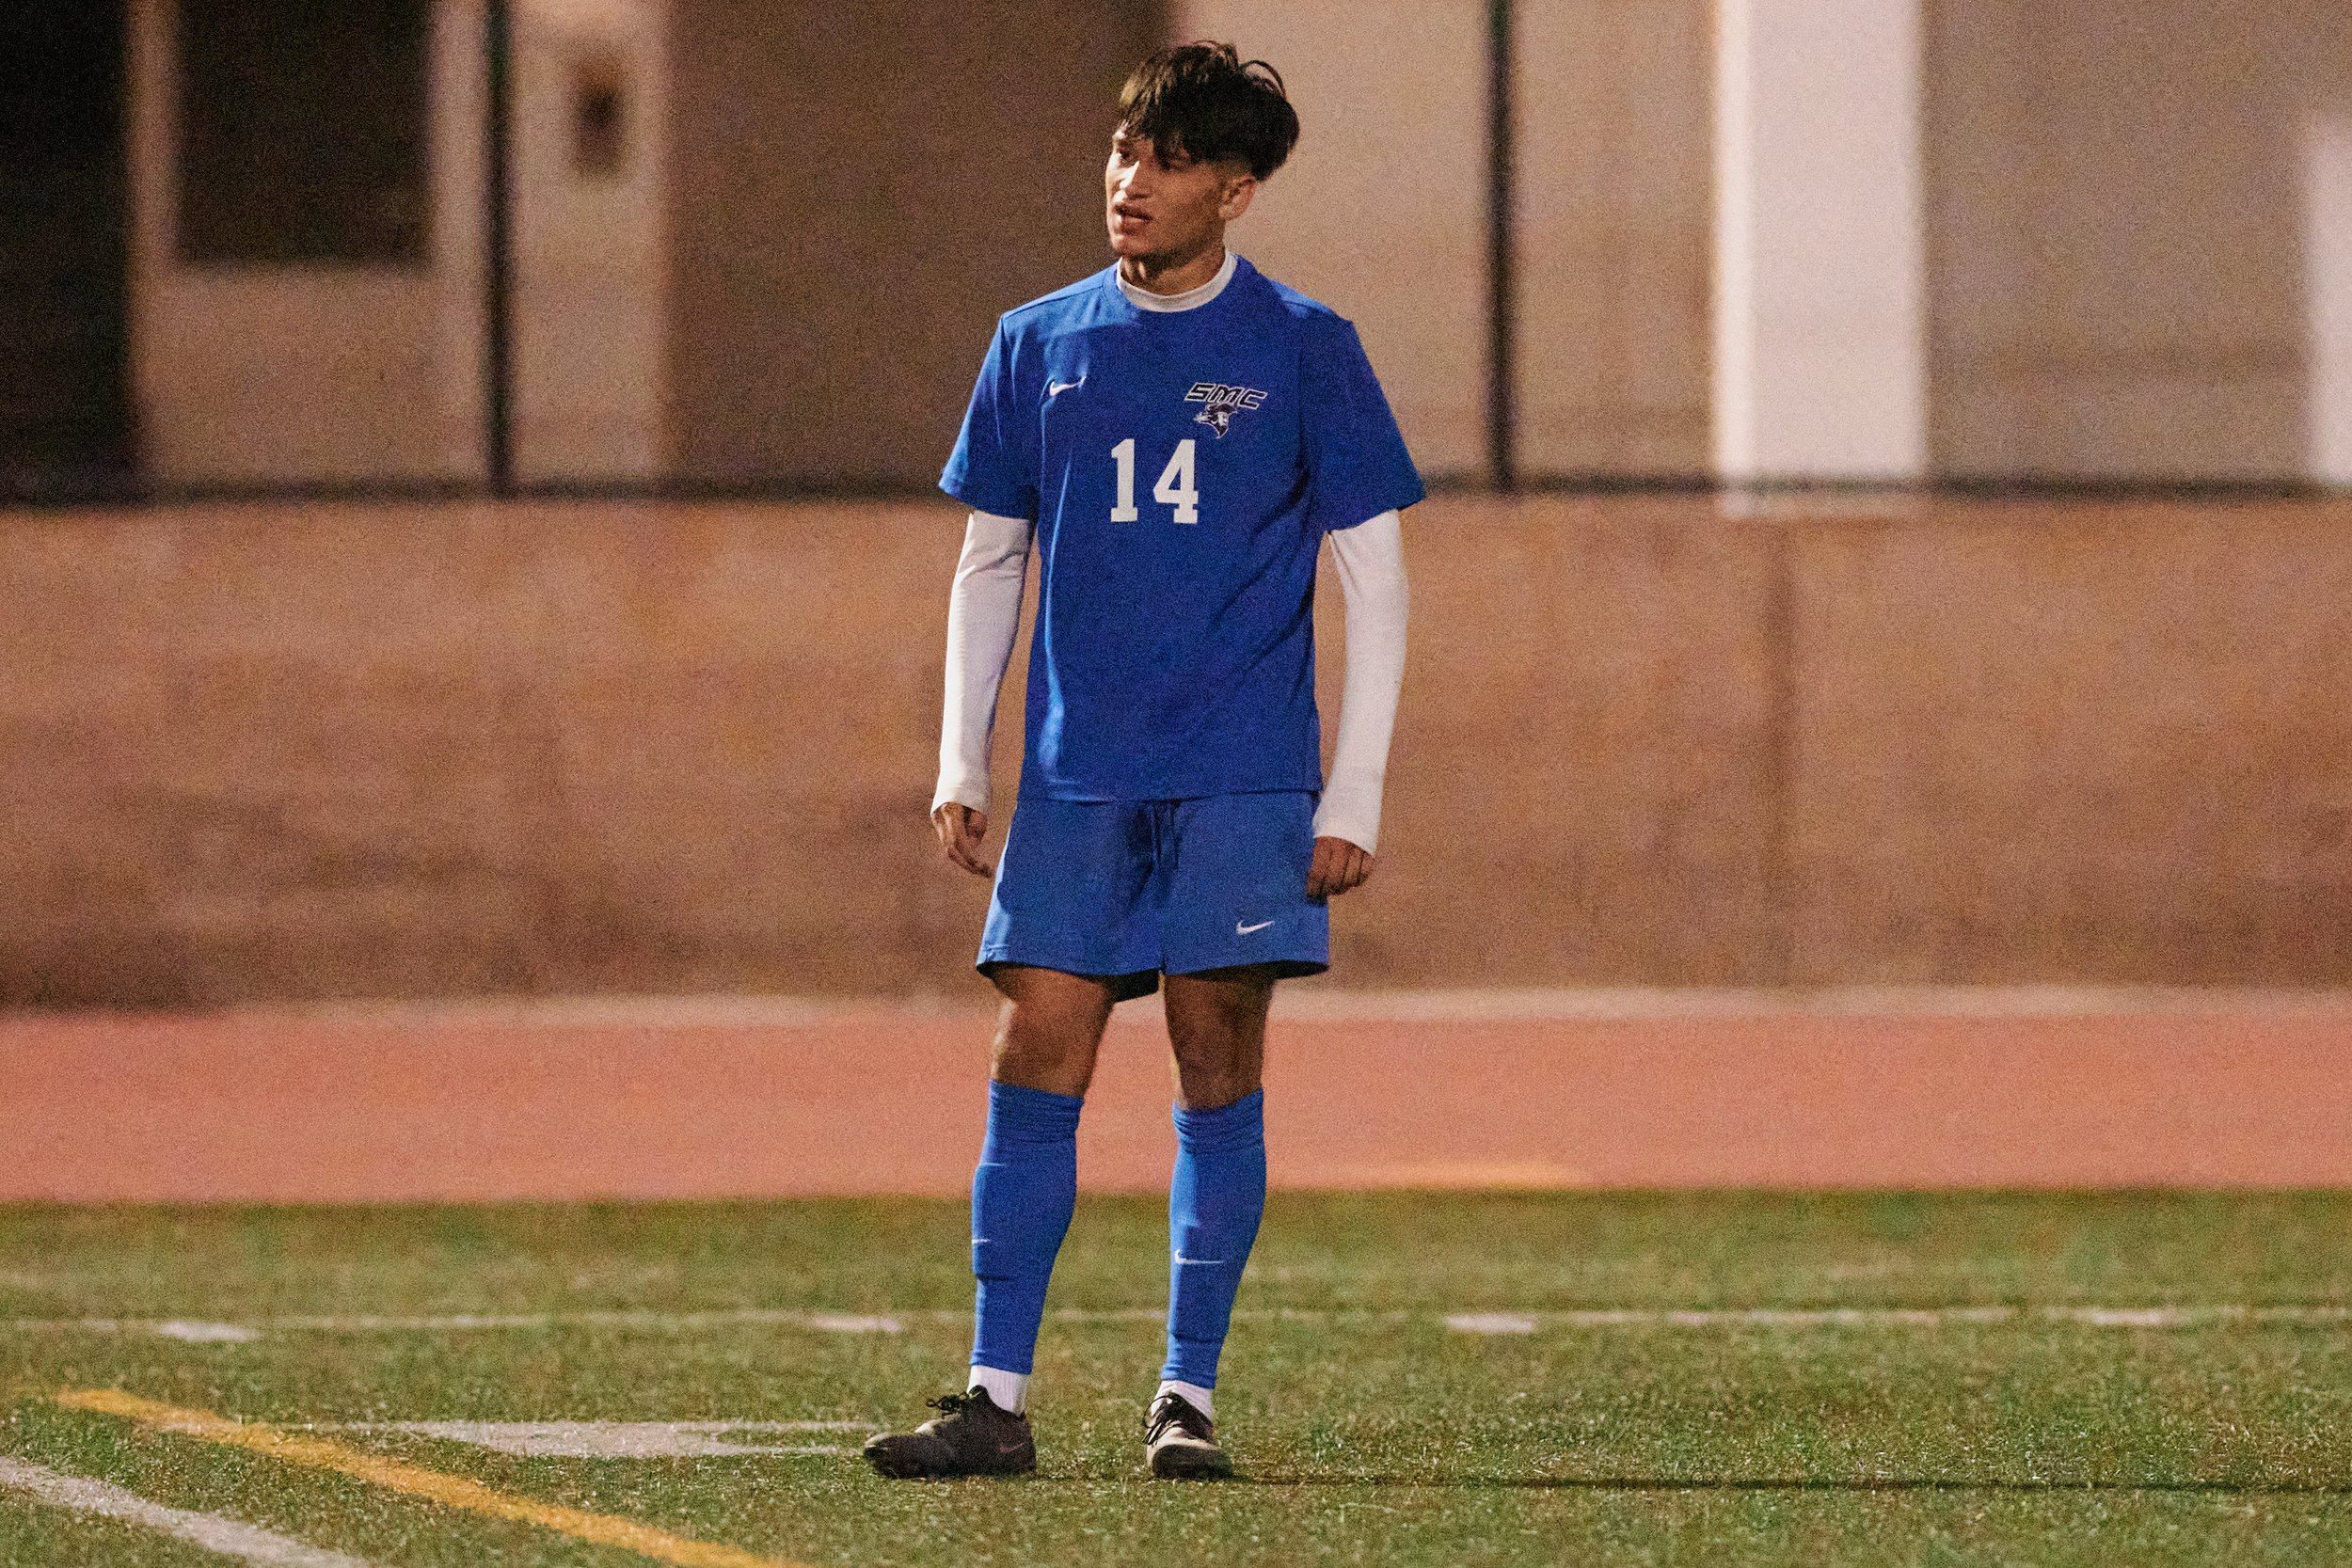  Santa Monica College Corsairs forward Jose Urdiano reacts to missing an attempt on goal during the men's soccer match against the Rio Hondo College Roadrunners on Saturday, Nov. 18, 2023, at Corsair Field in Santa Monica, Calif. The Corsairs lost 3-